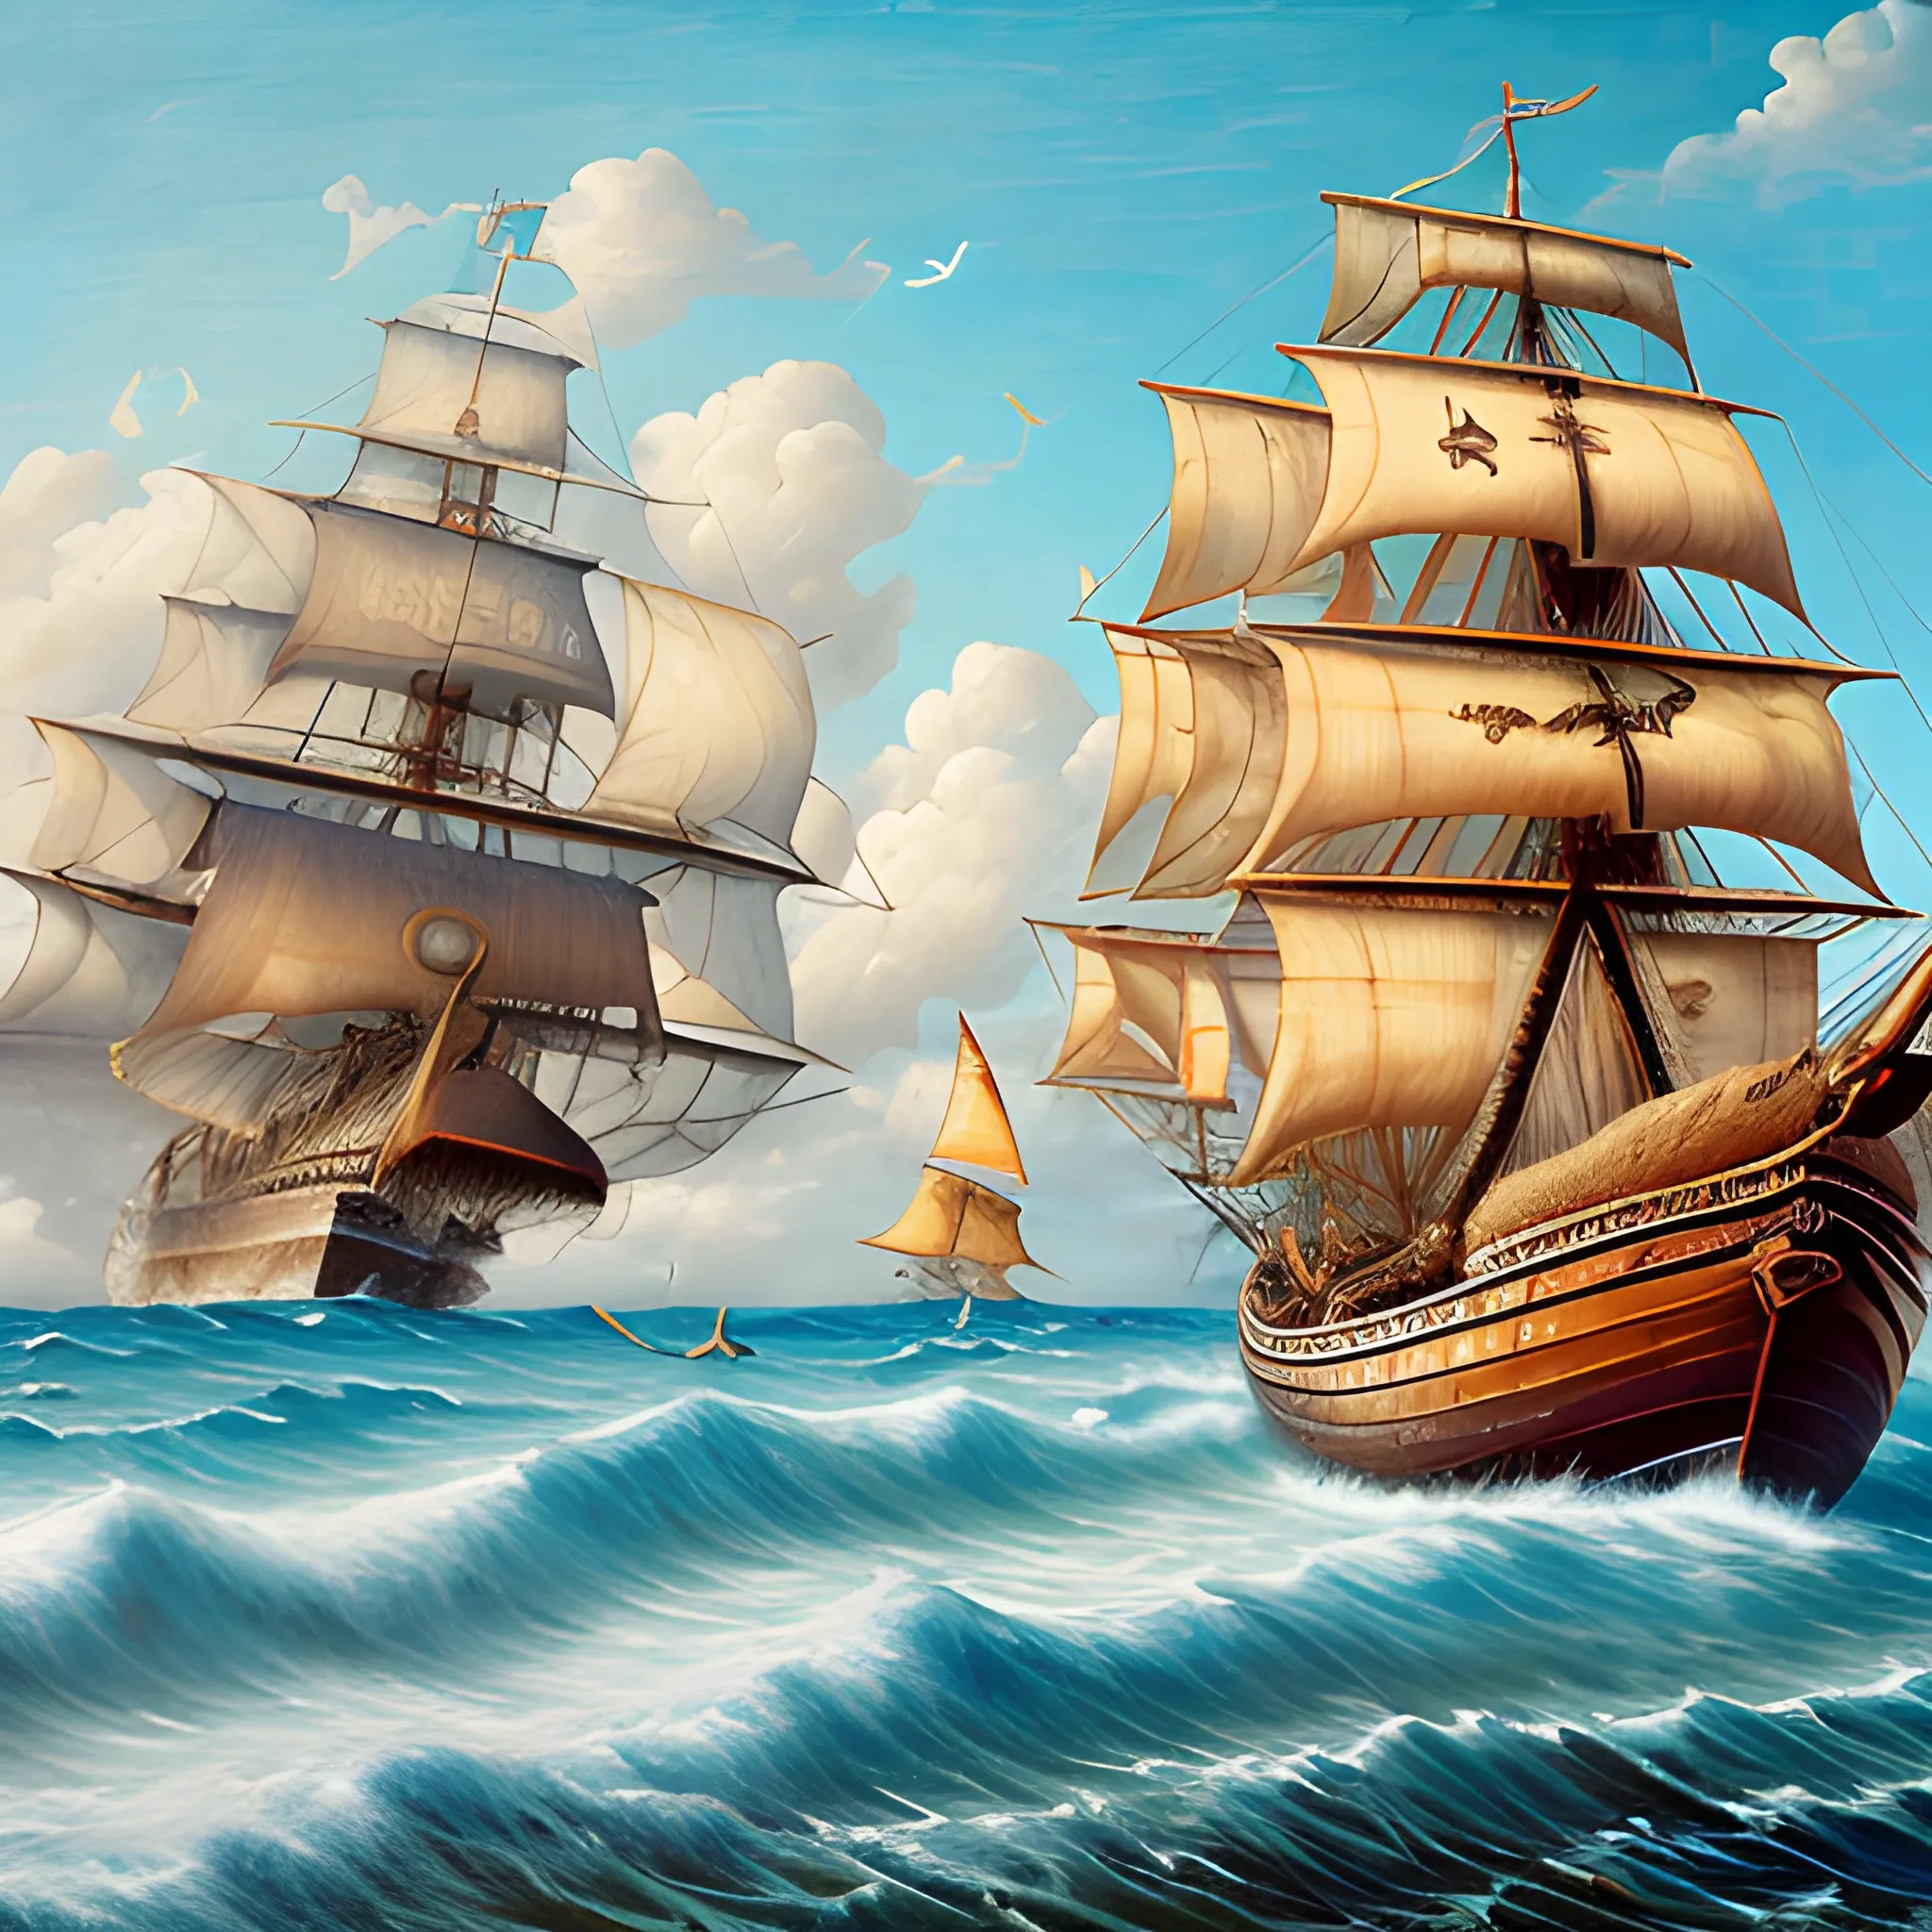 A pirate ship sailing away in a wavy sea, thick burlap sails blown with the wind, large ship, full side view of the ship, view from the rear starboard side of the ship, Wonderful painting, Akihito Yoshida oil painting style, highly detailed,, Oil Painting, Caribbean treas and beach on the Left. 